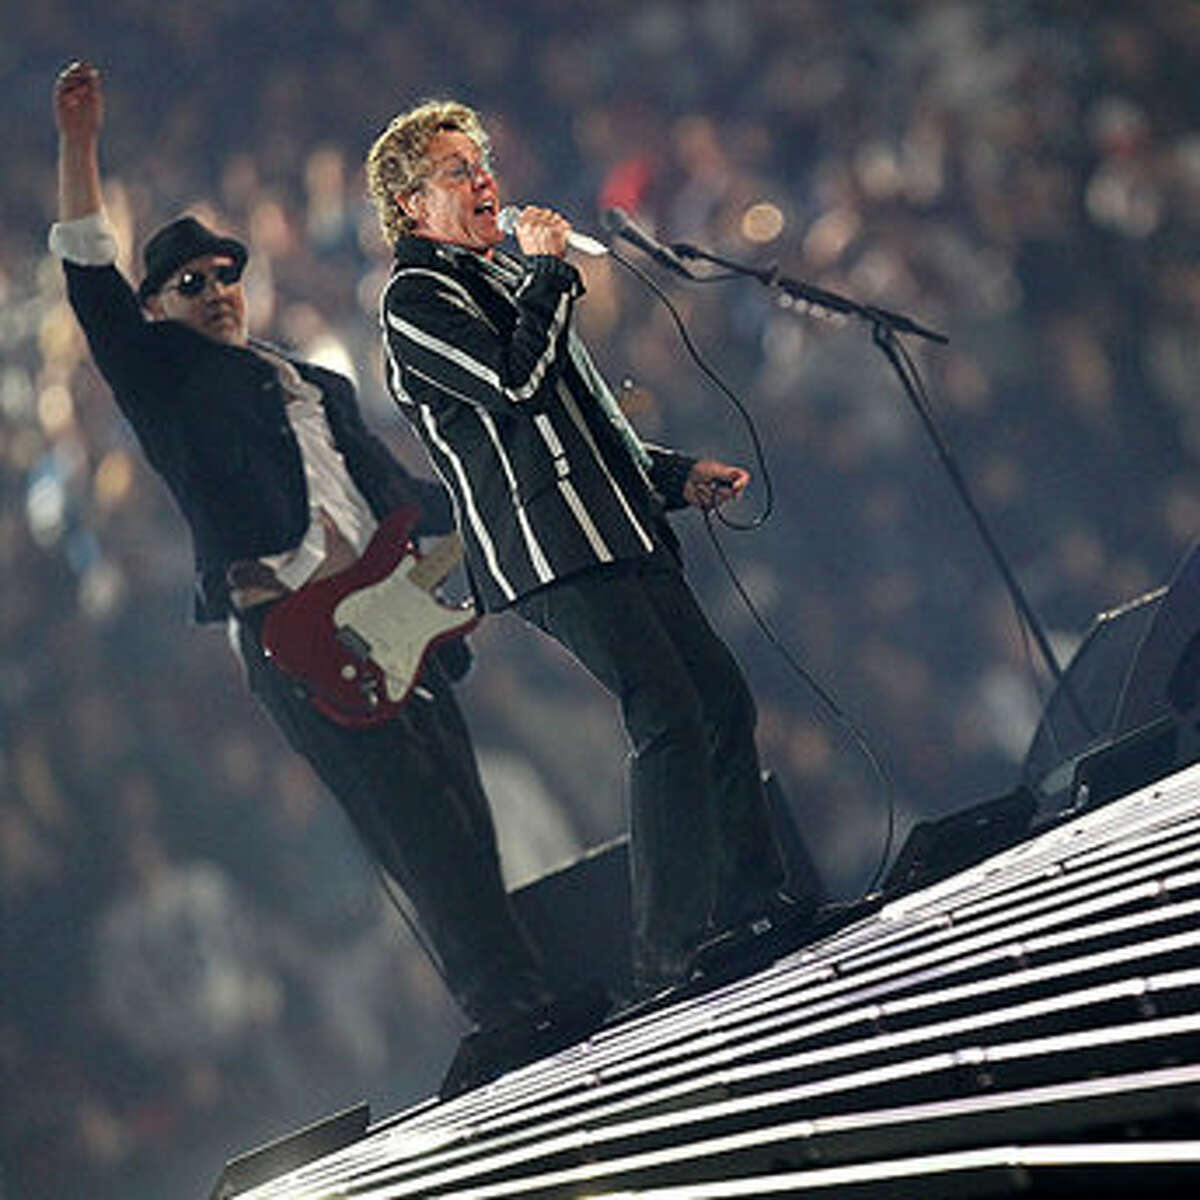 Pete Townshend and Roger Daltrey of The Who perform at the Super Bowl.